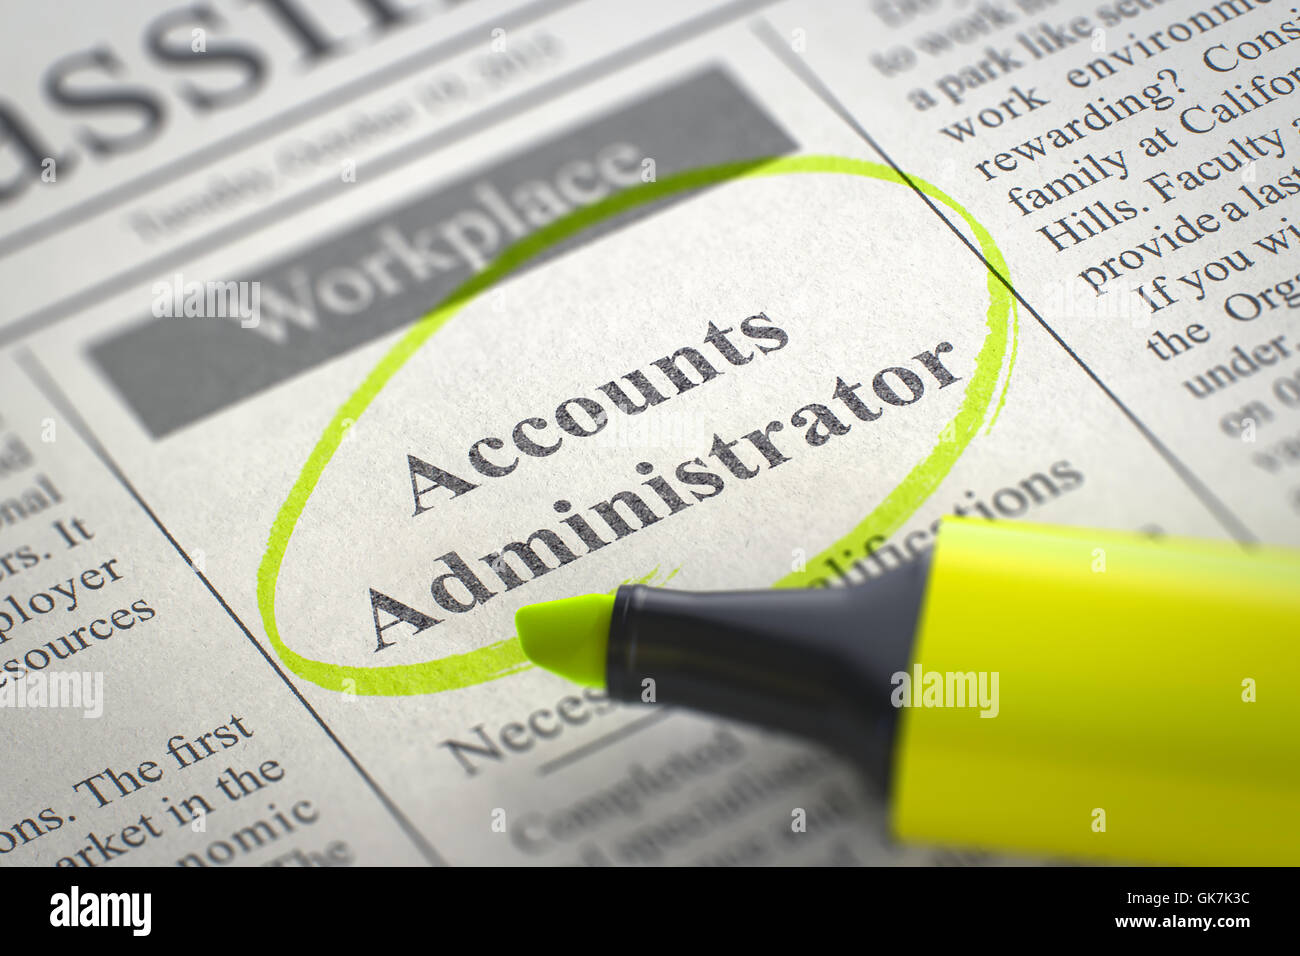 Accounts Administrator Join Our Team. Stock Photo